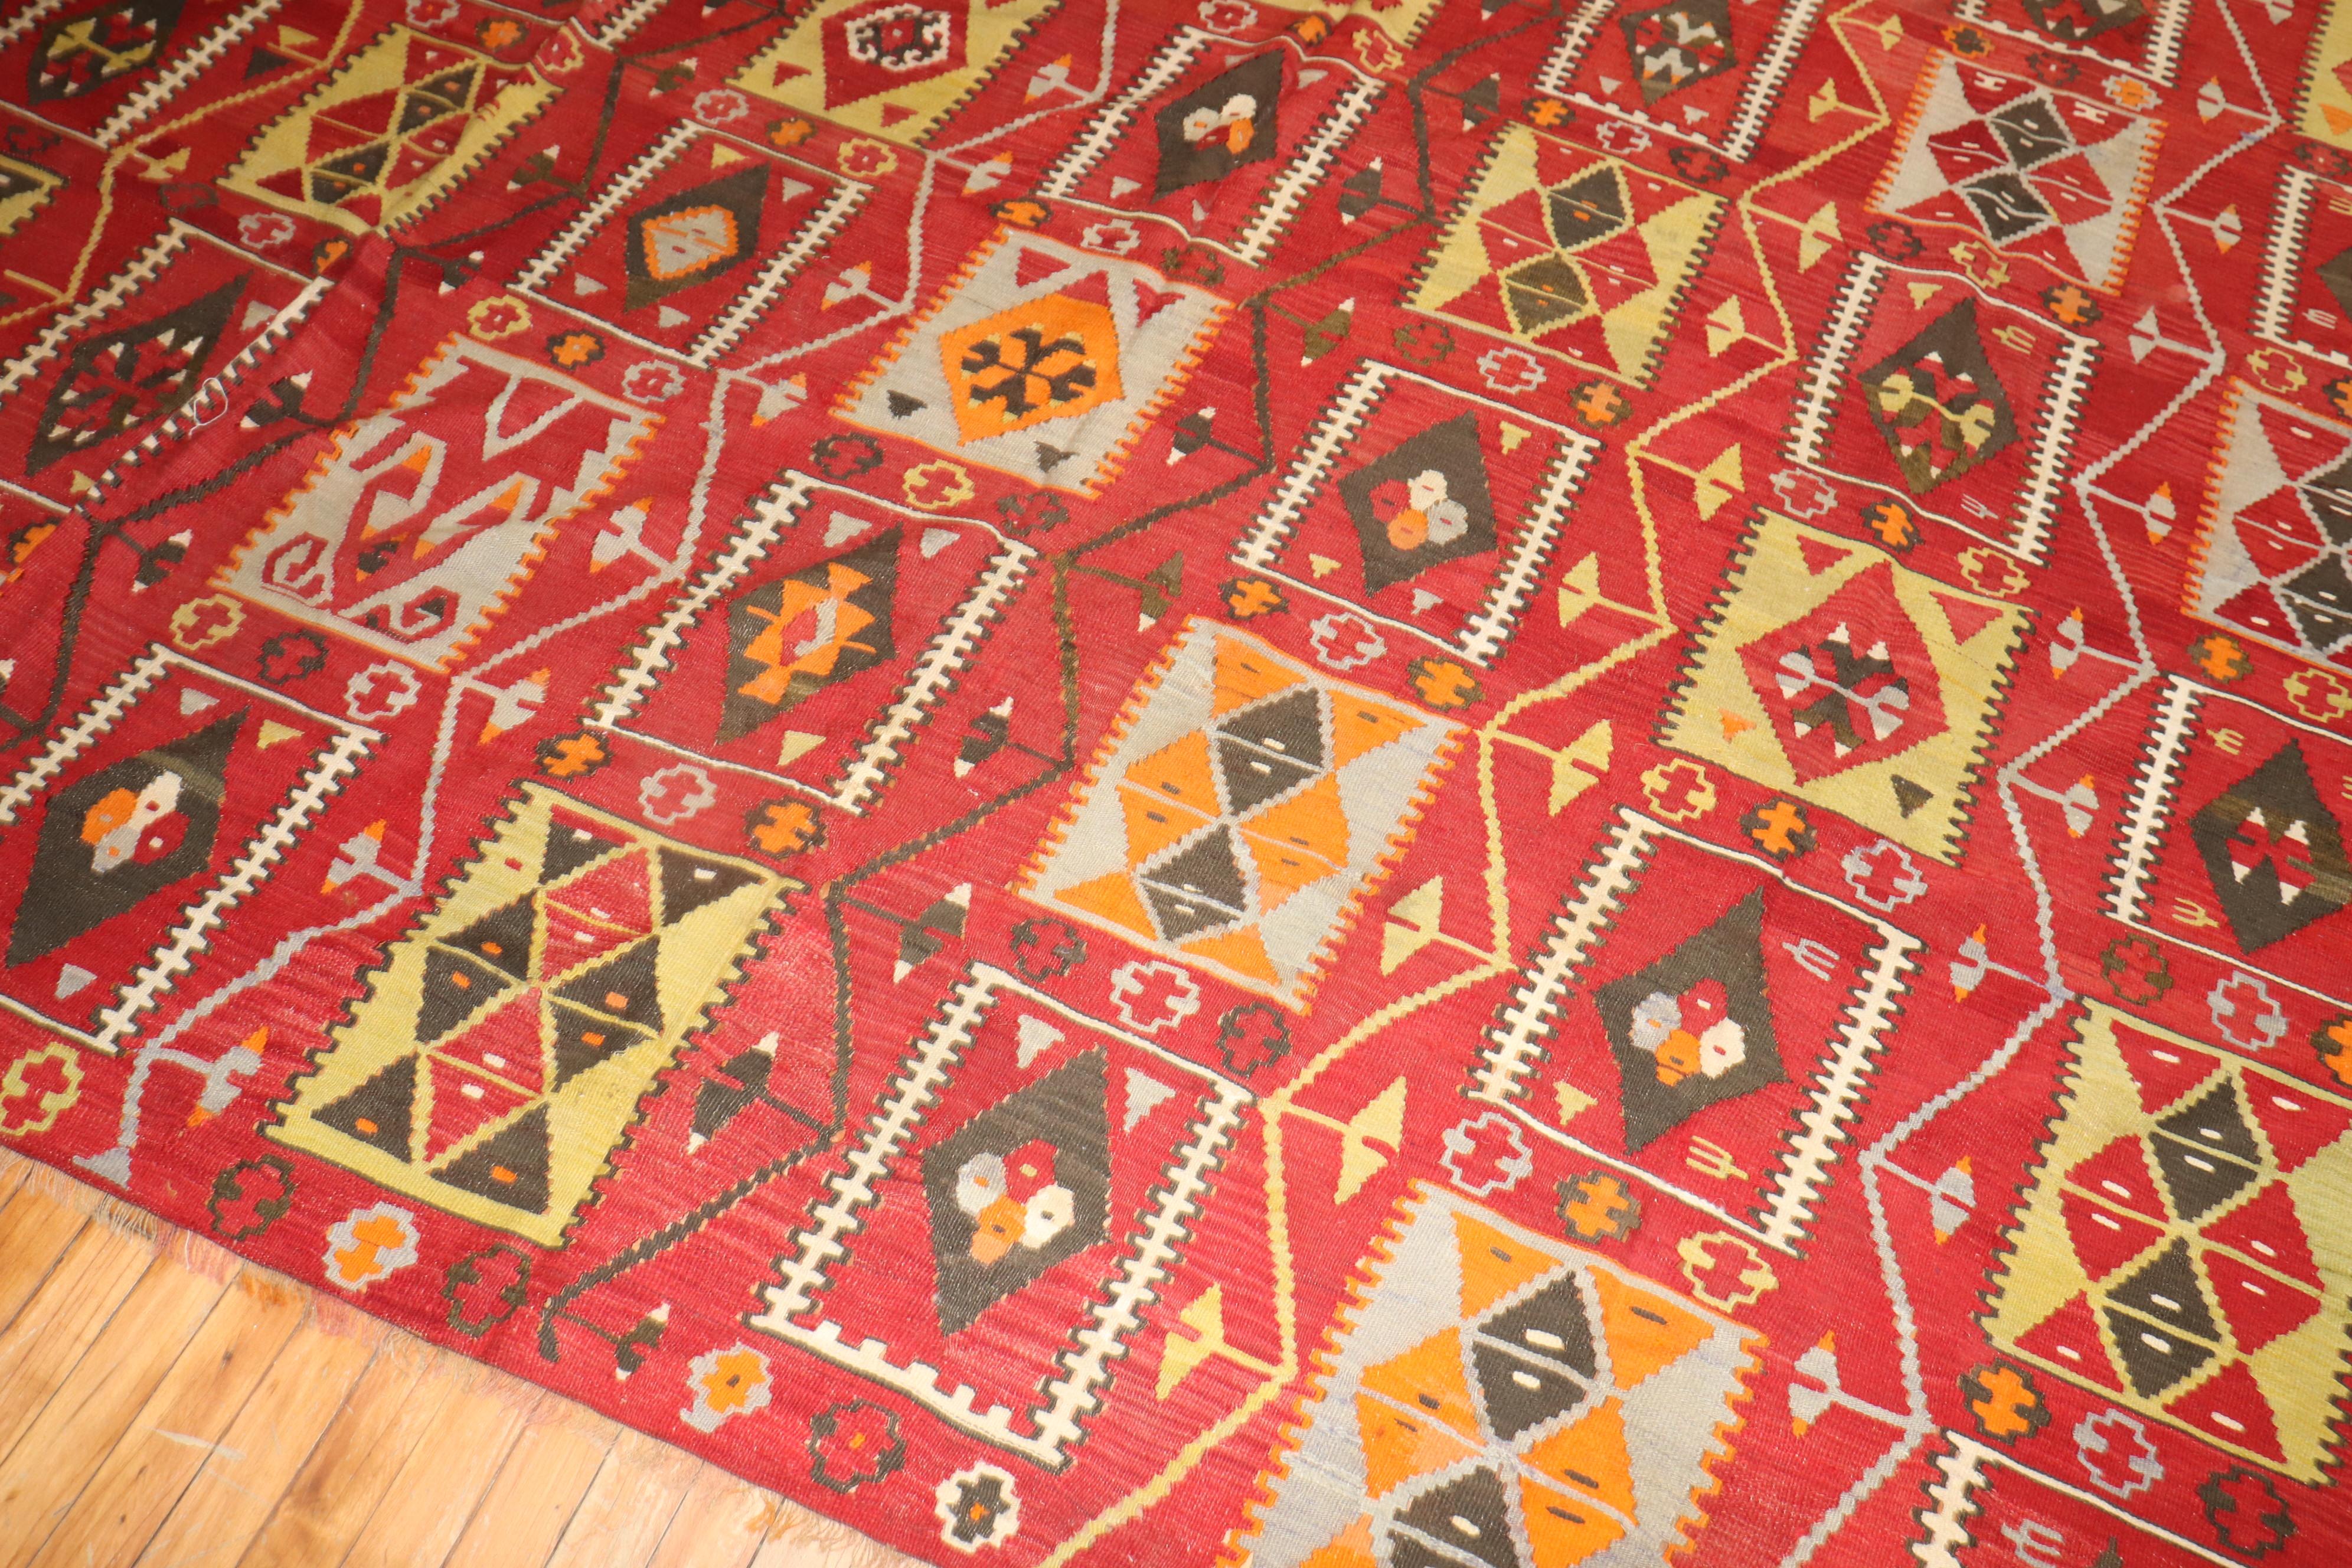 Vintage Turkish Kilim with a colorful repetitive square design on a cherry red colored ground.

Measures: 8'10